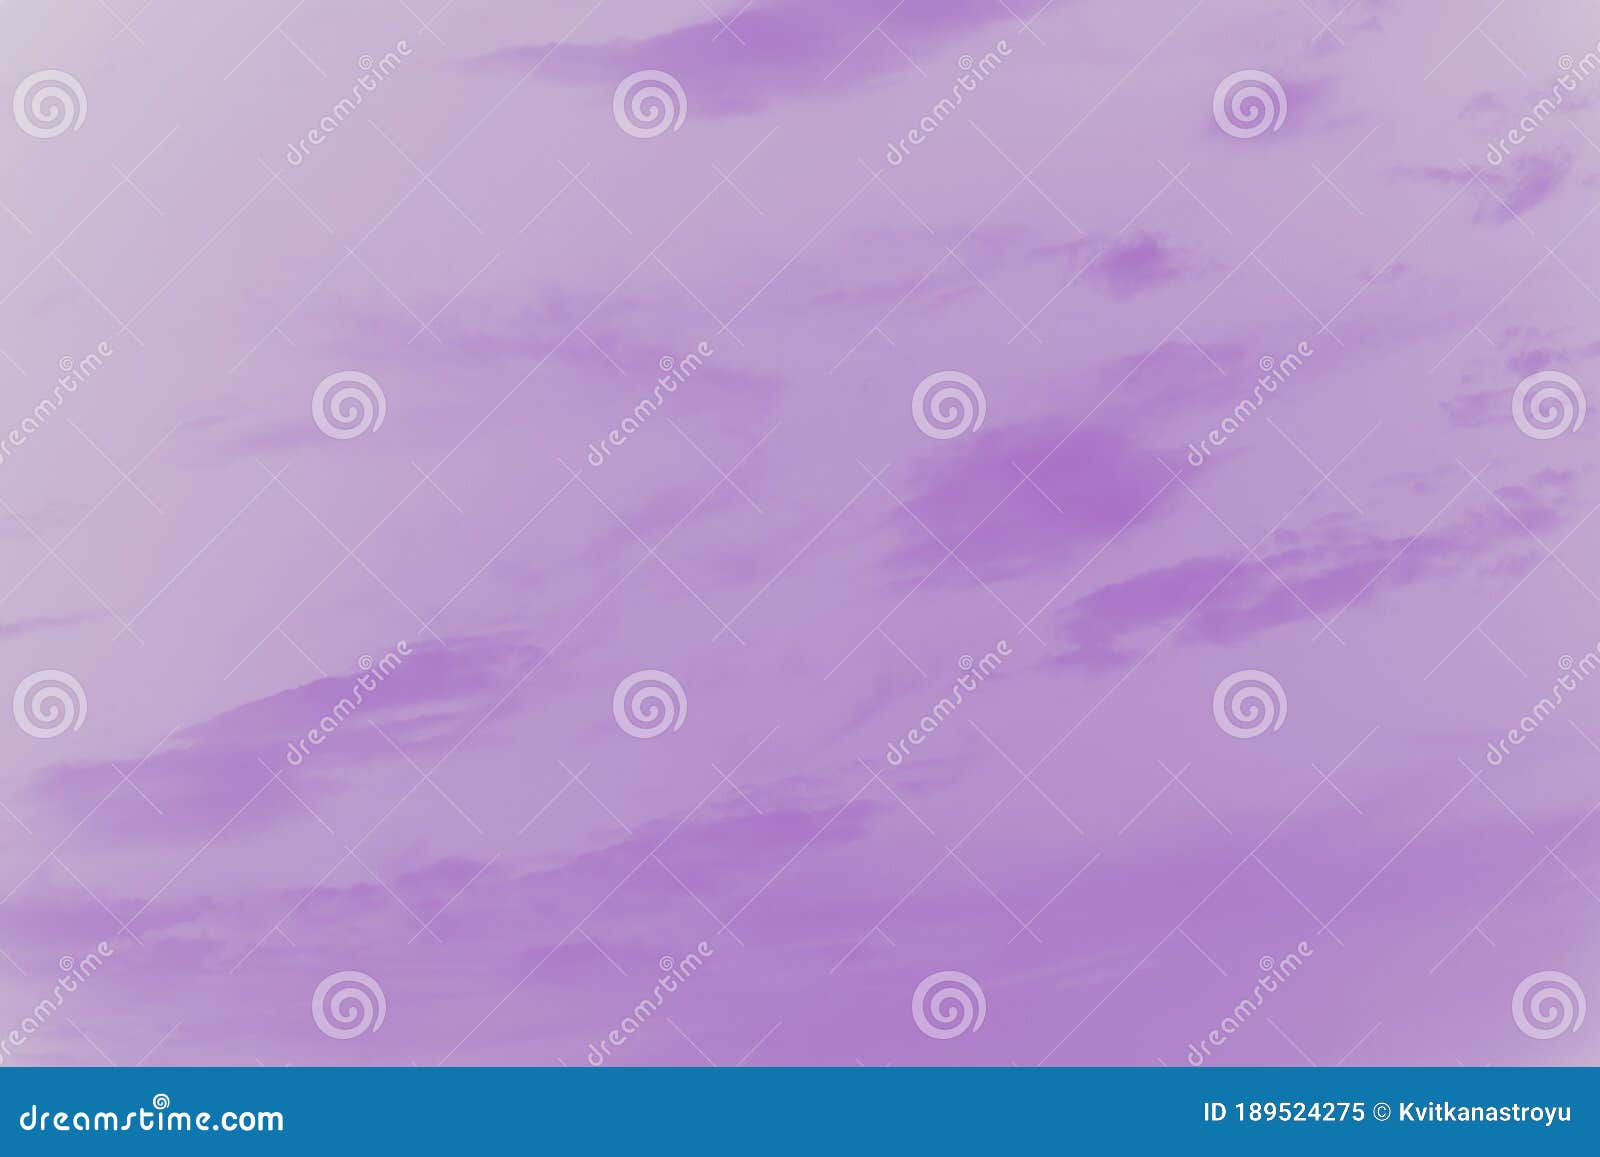 Pastel Purple Background Images HD Pictures and Wallpaper For Free  Download  Pngtree